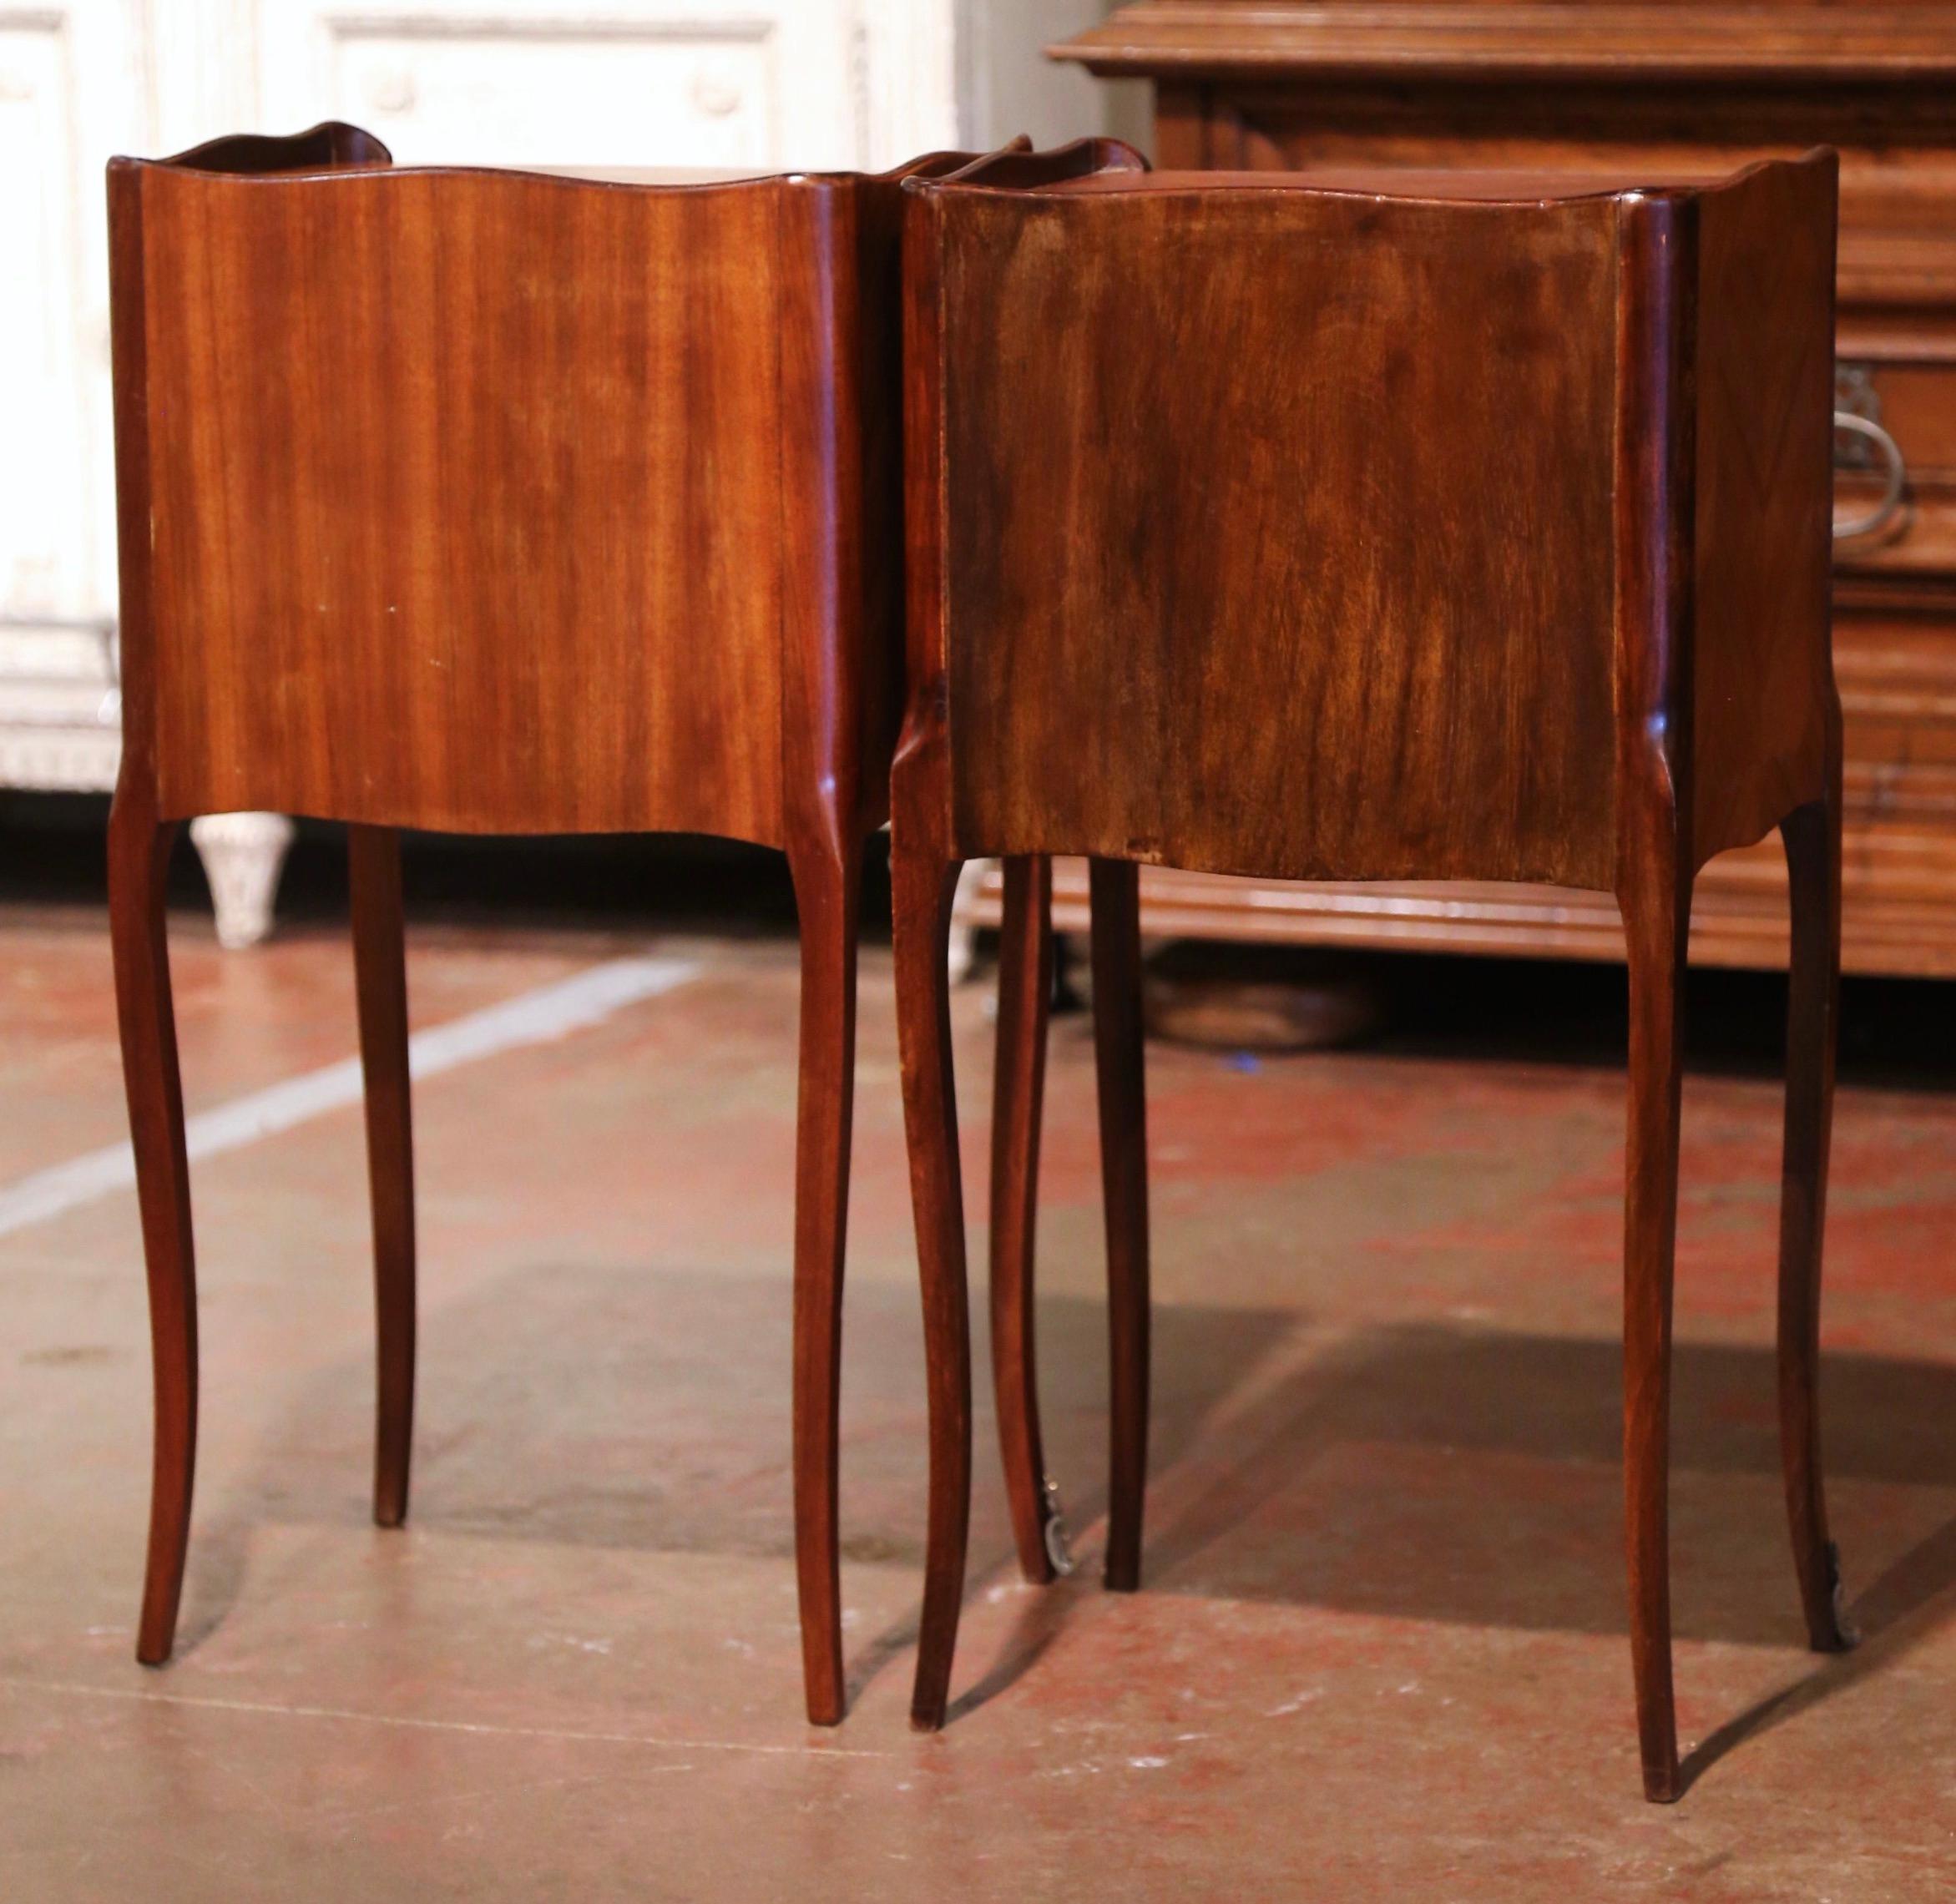 Pair of 19th Century French Walnut Nightstands with Leather Book Spine Doors For Sale 11